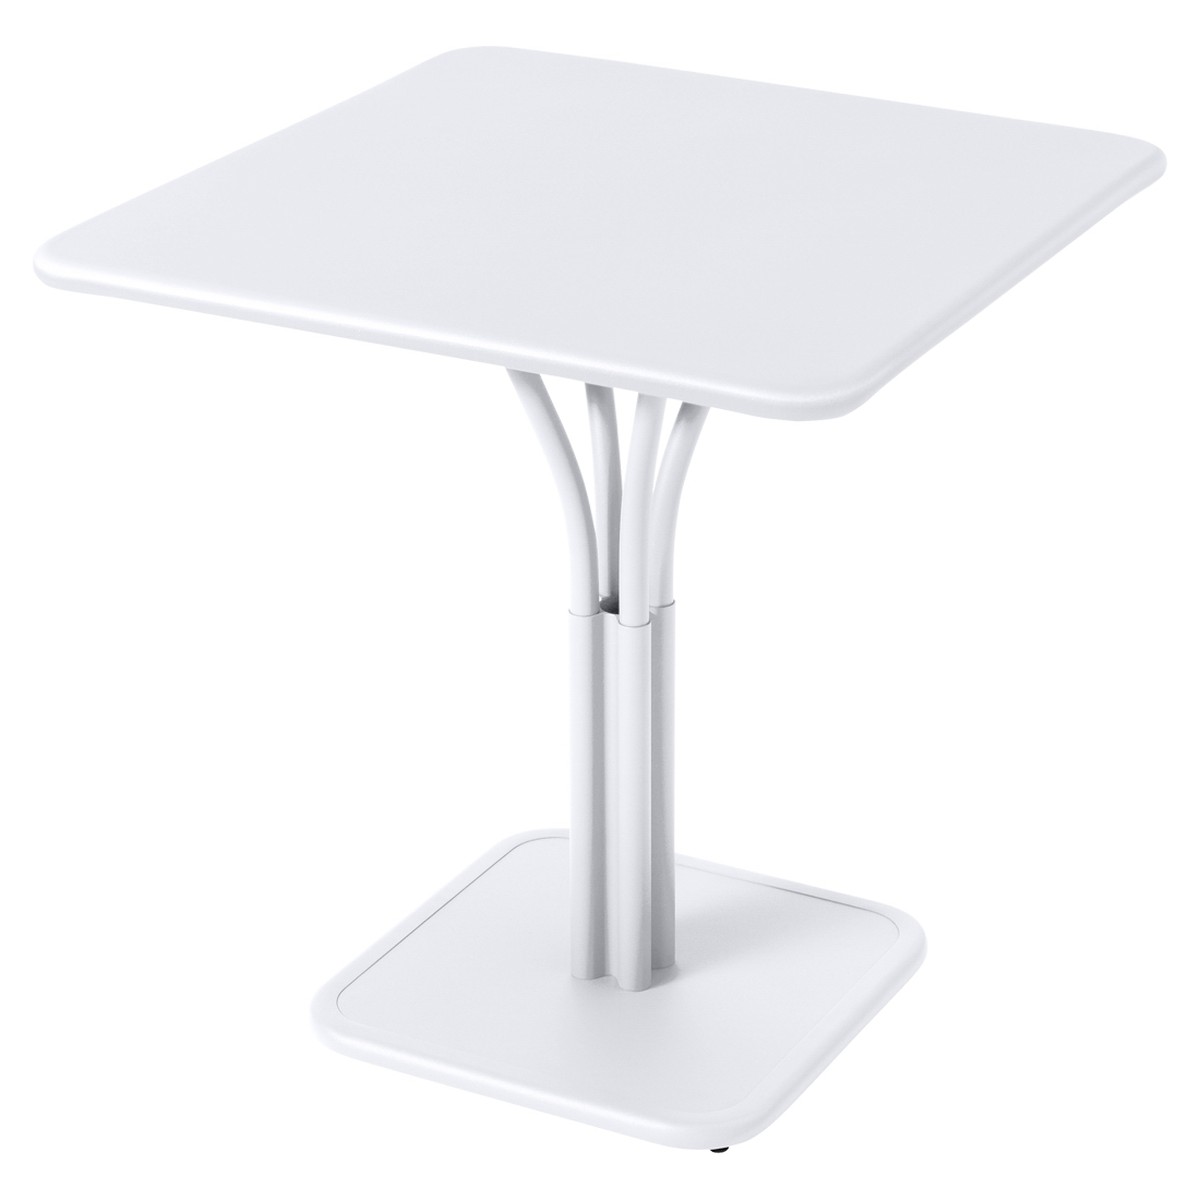 Fermob Luxembourg Table Luxembourg carrée pied central Blanc L 71 x l 71 x H74cm